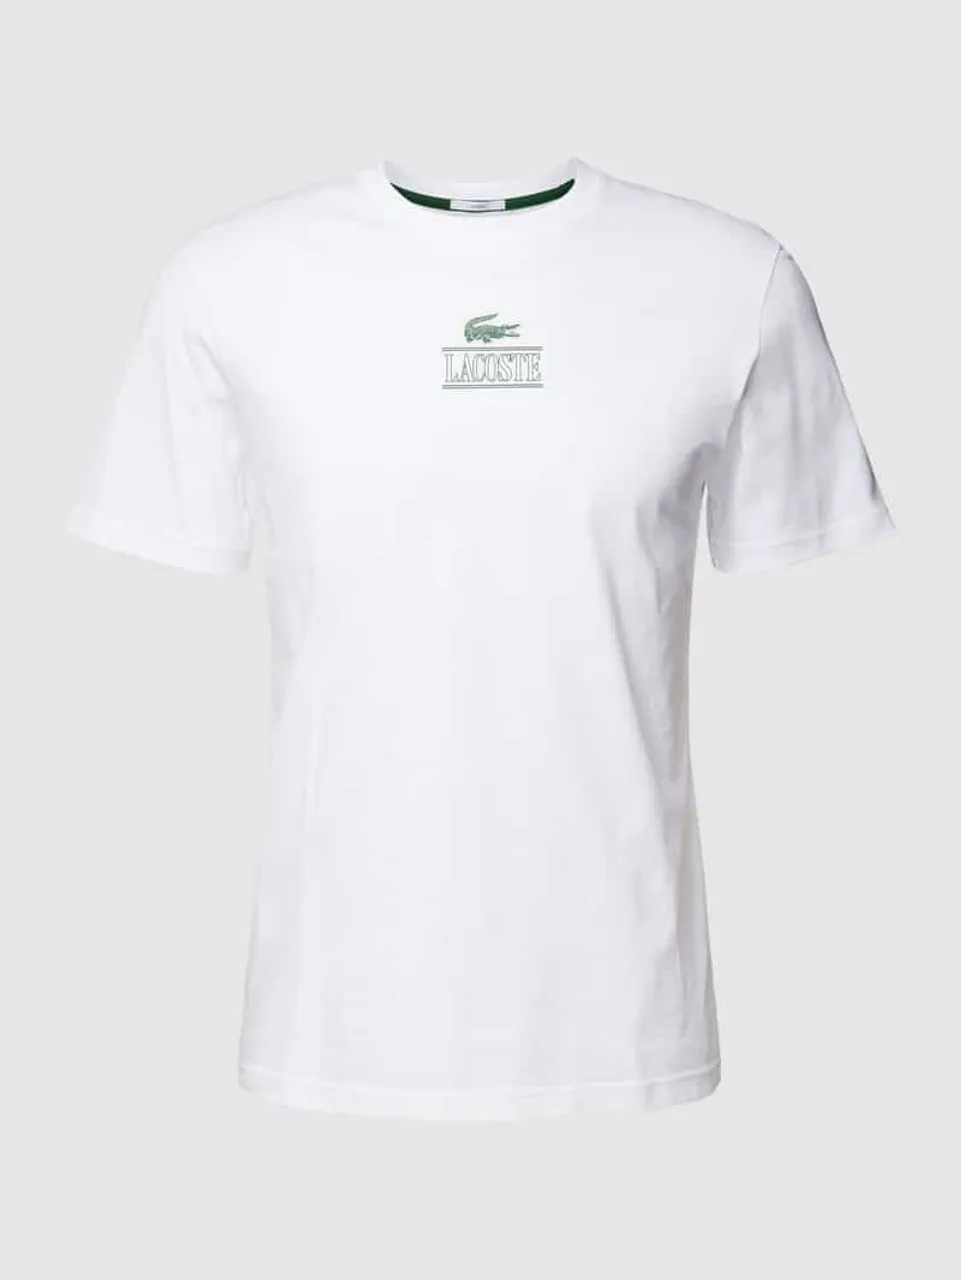 Lacoste T-Shirt mit Label-Print in Weiss